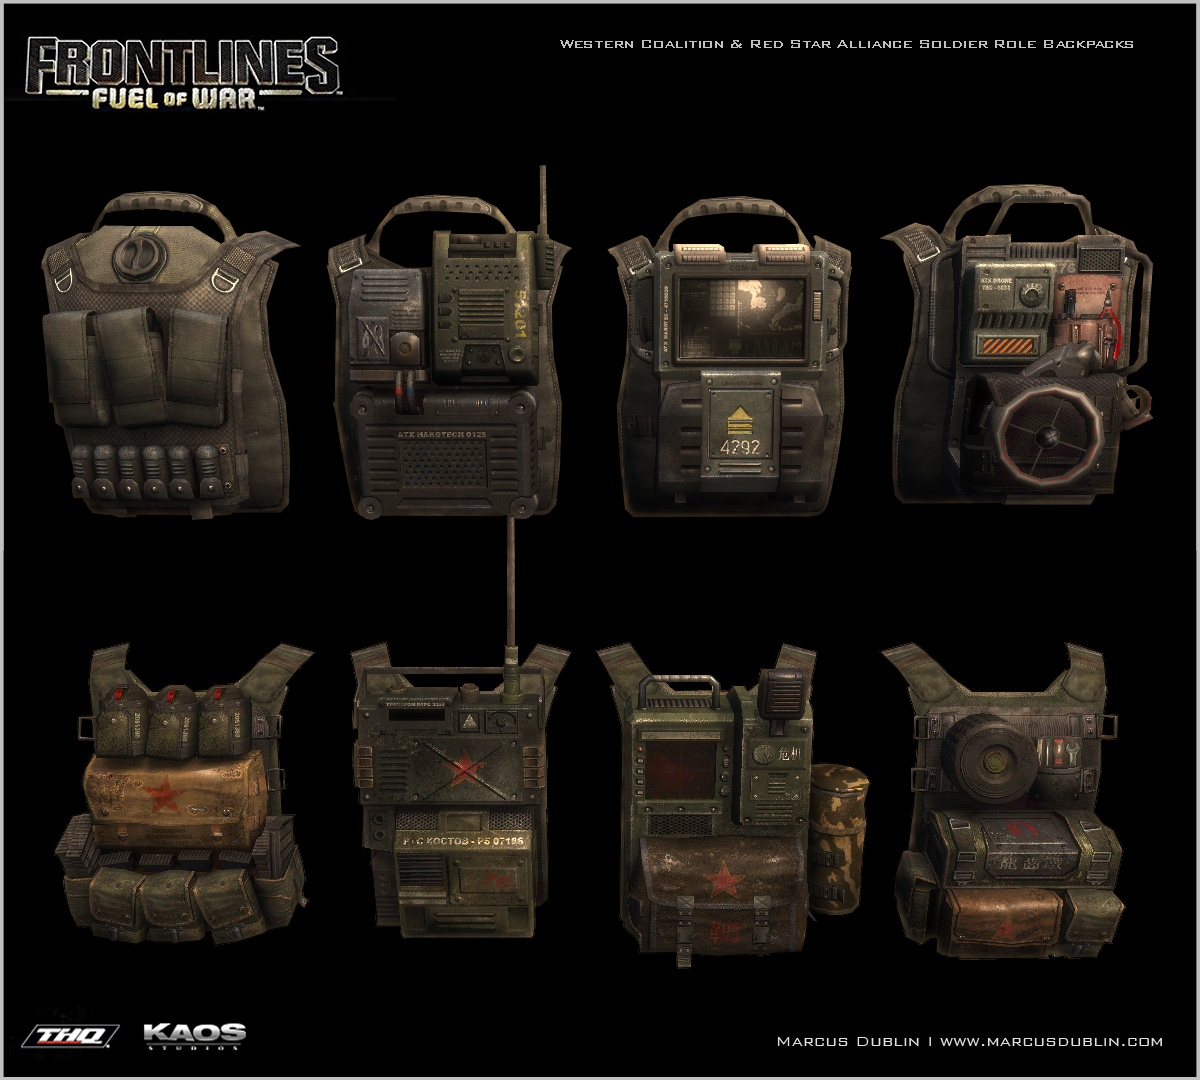 MarcusDublin_FrontlinesFOW_WC_RS_Soldier_Role_Backpacks.jpg